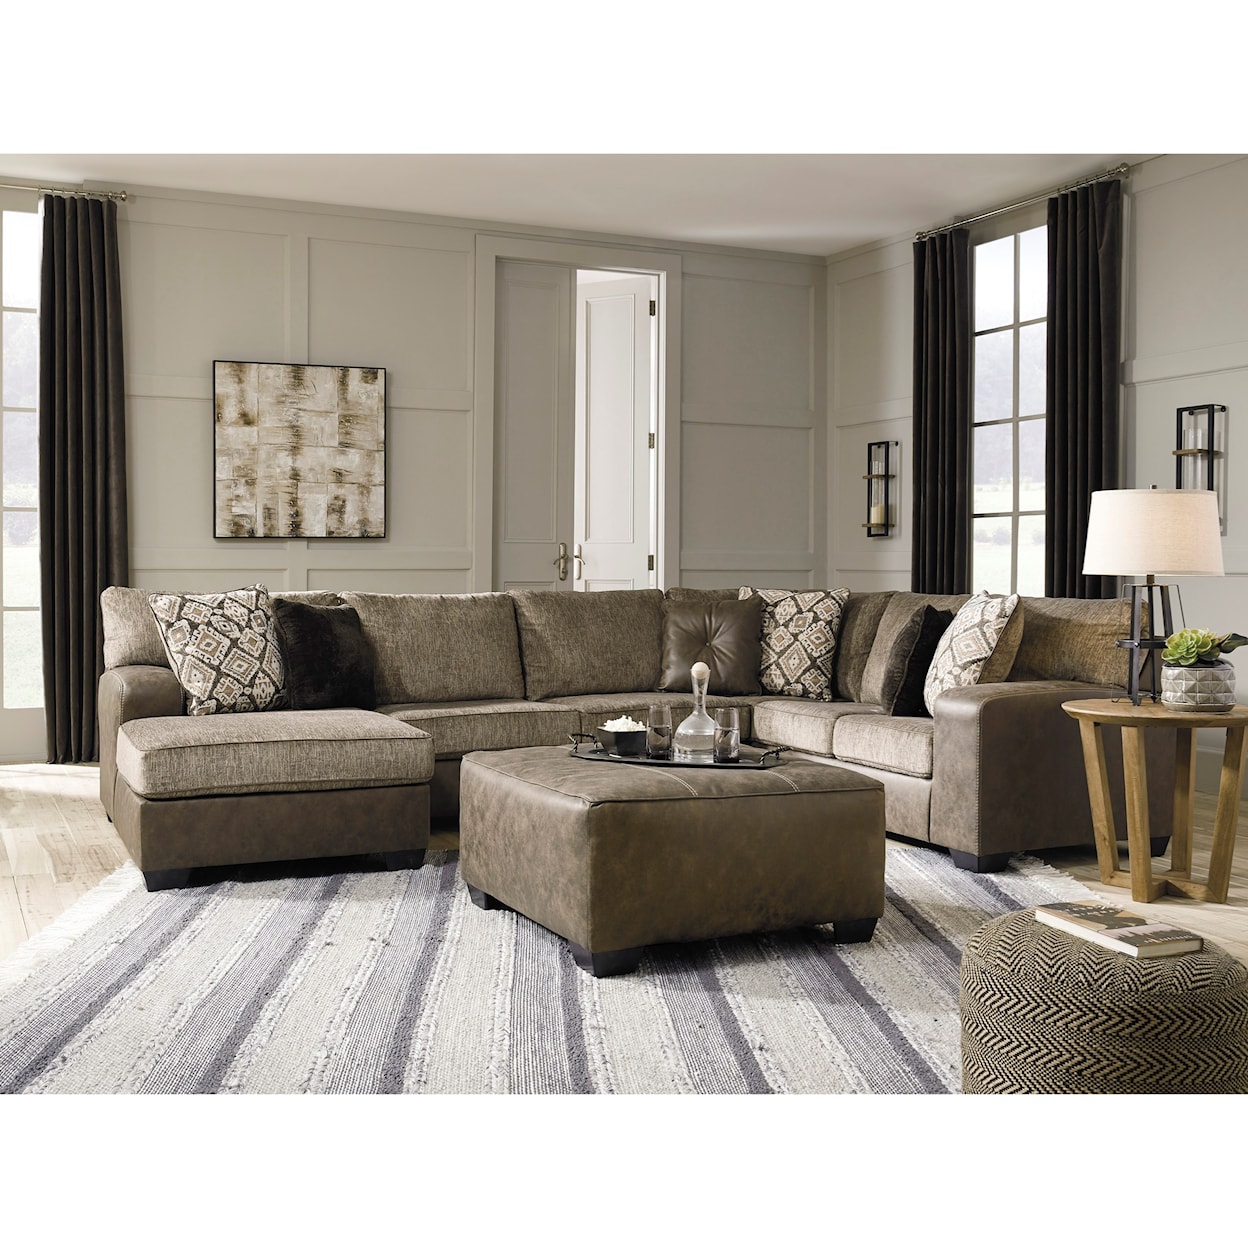 Ashley Furniture Benchcraft Abalone Living Room Group